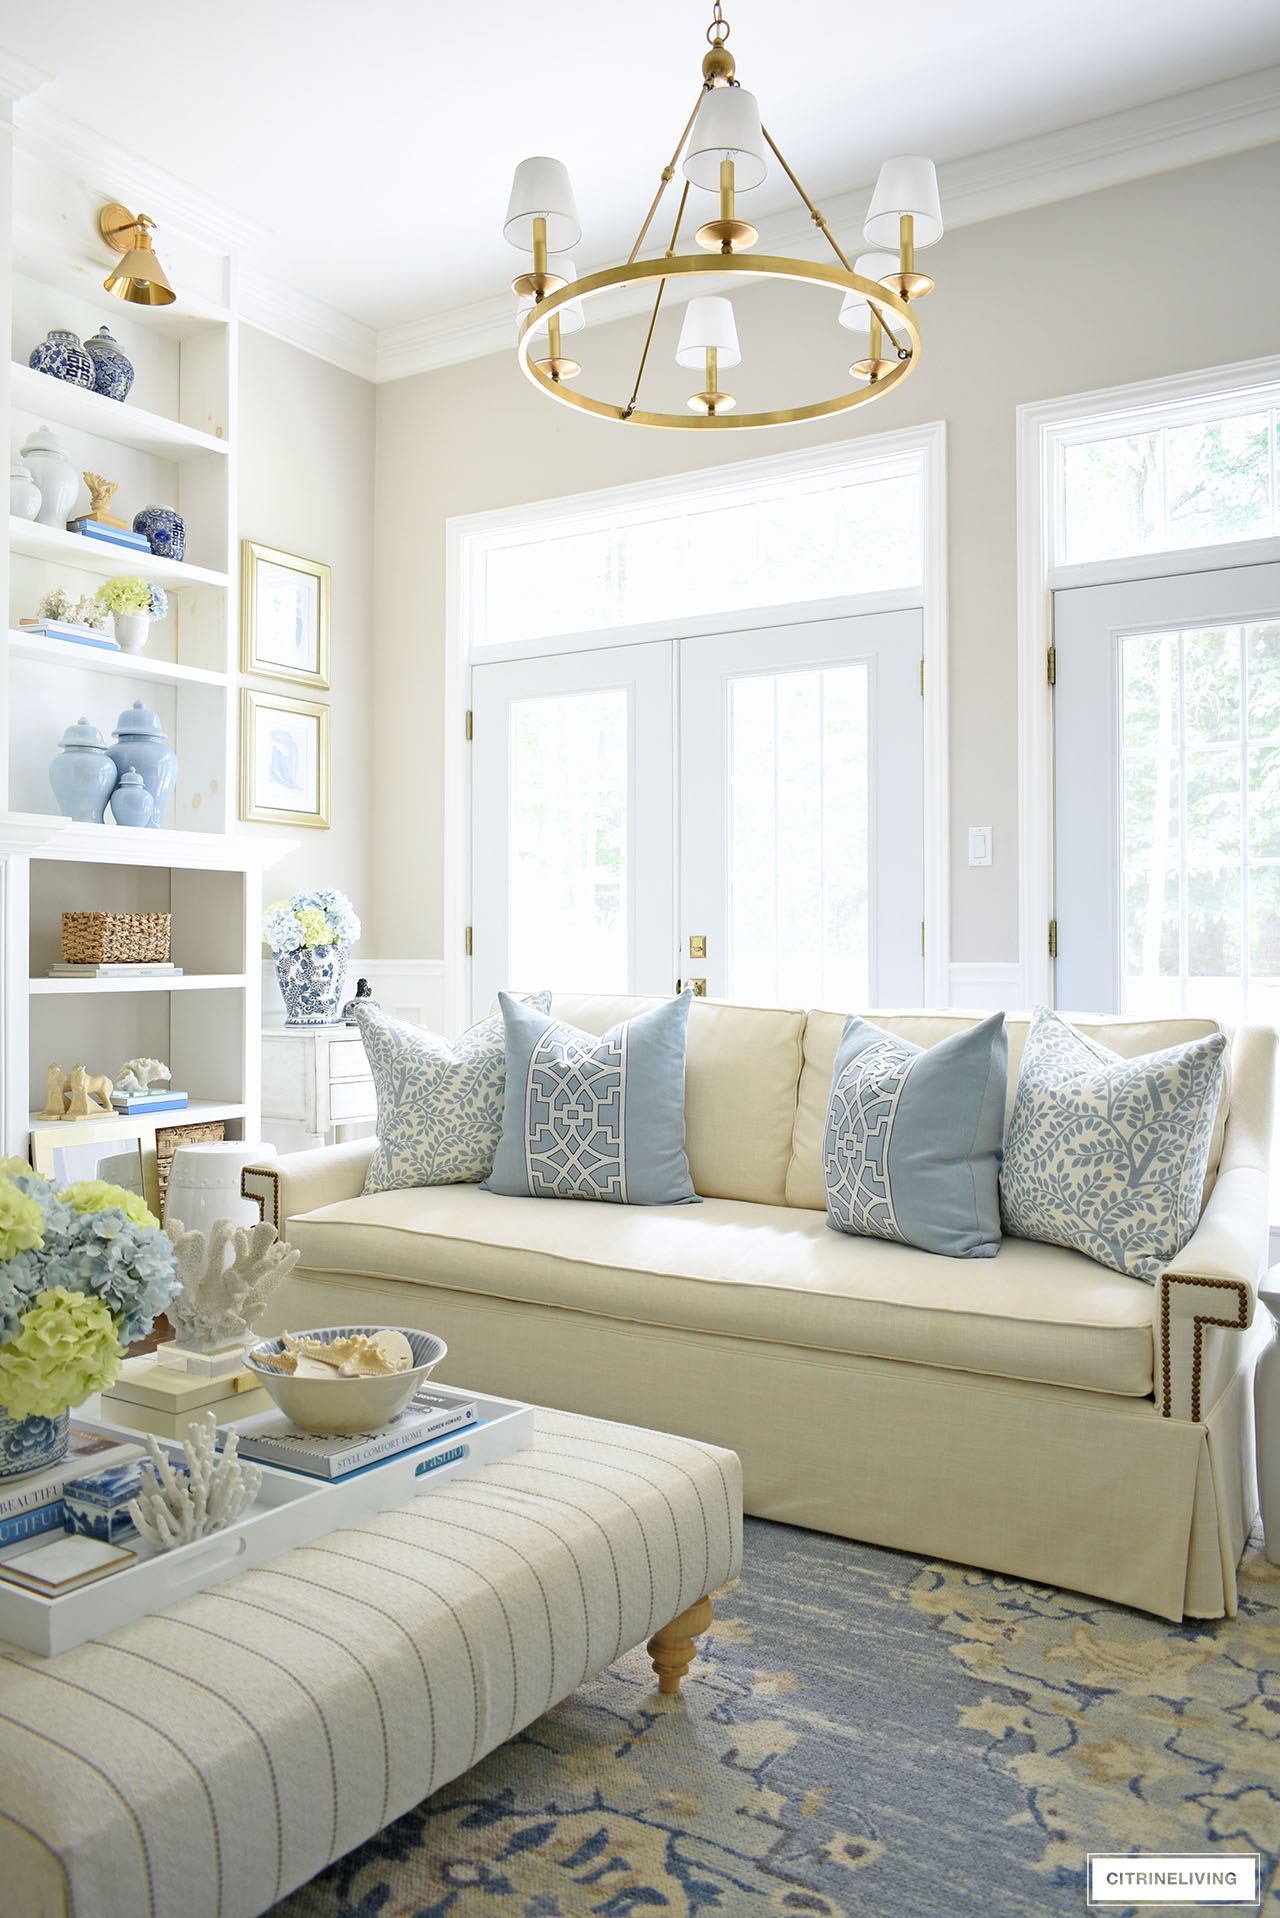 Gorgeous summer decorated living room with soft blues, warm whites. Faux hydrangea arrangements in light blue and green grace different areas around the space.